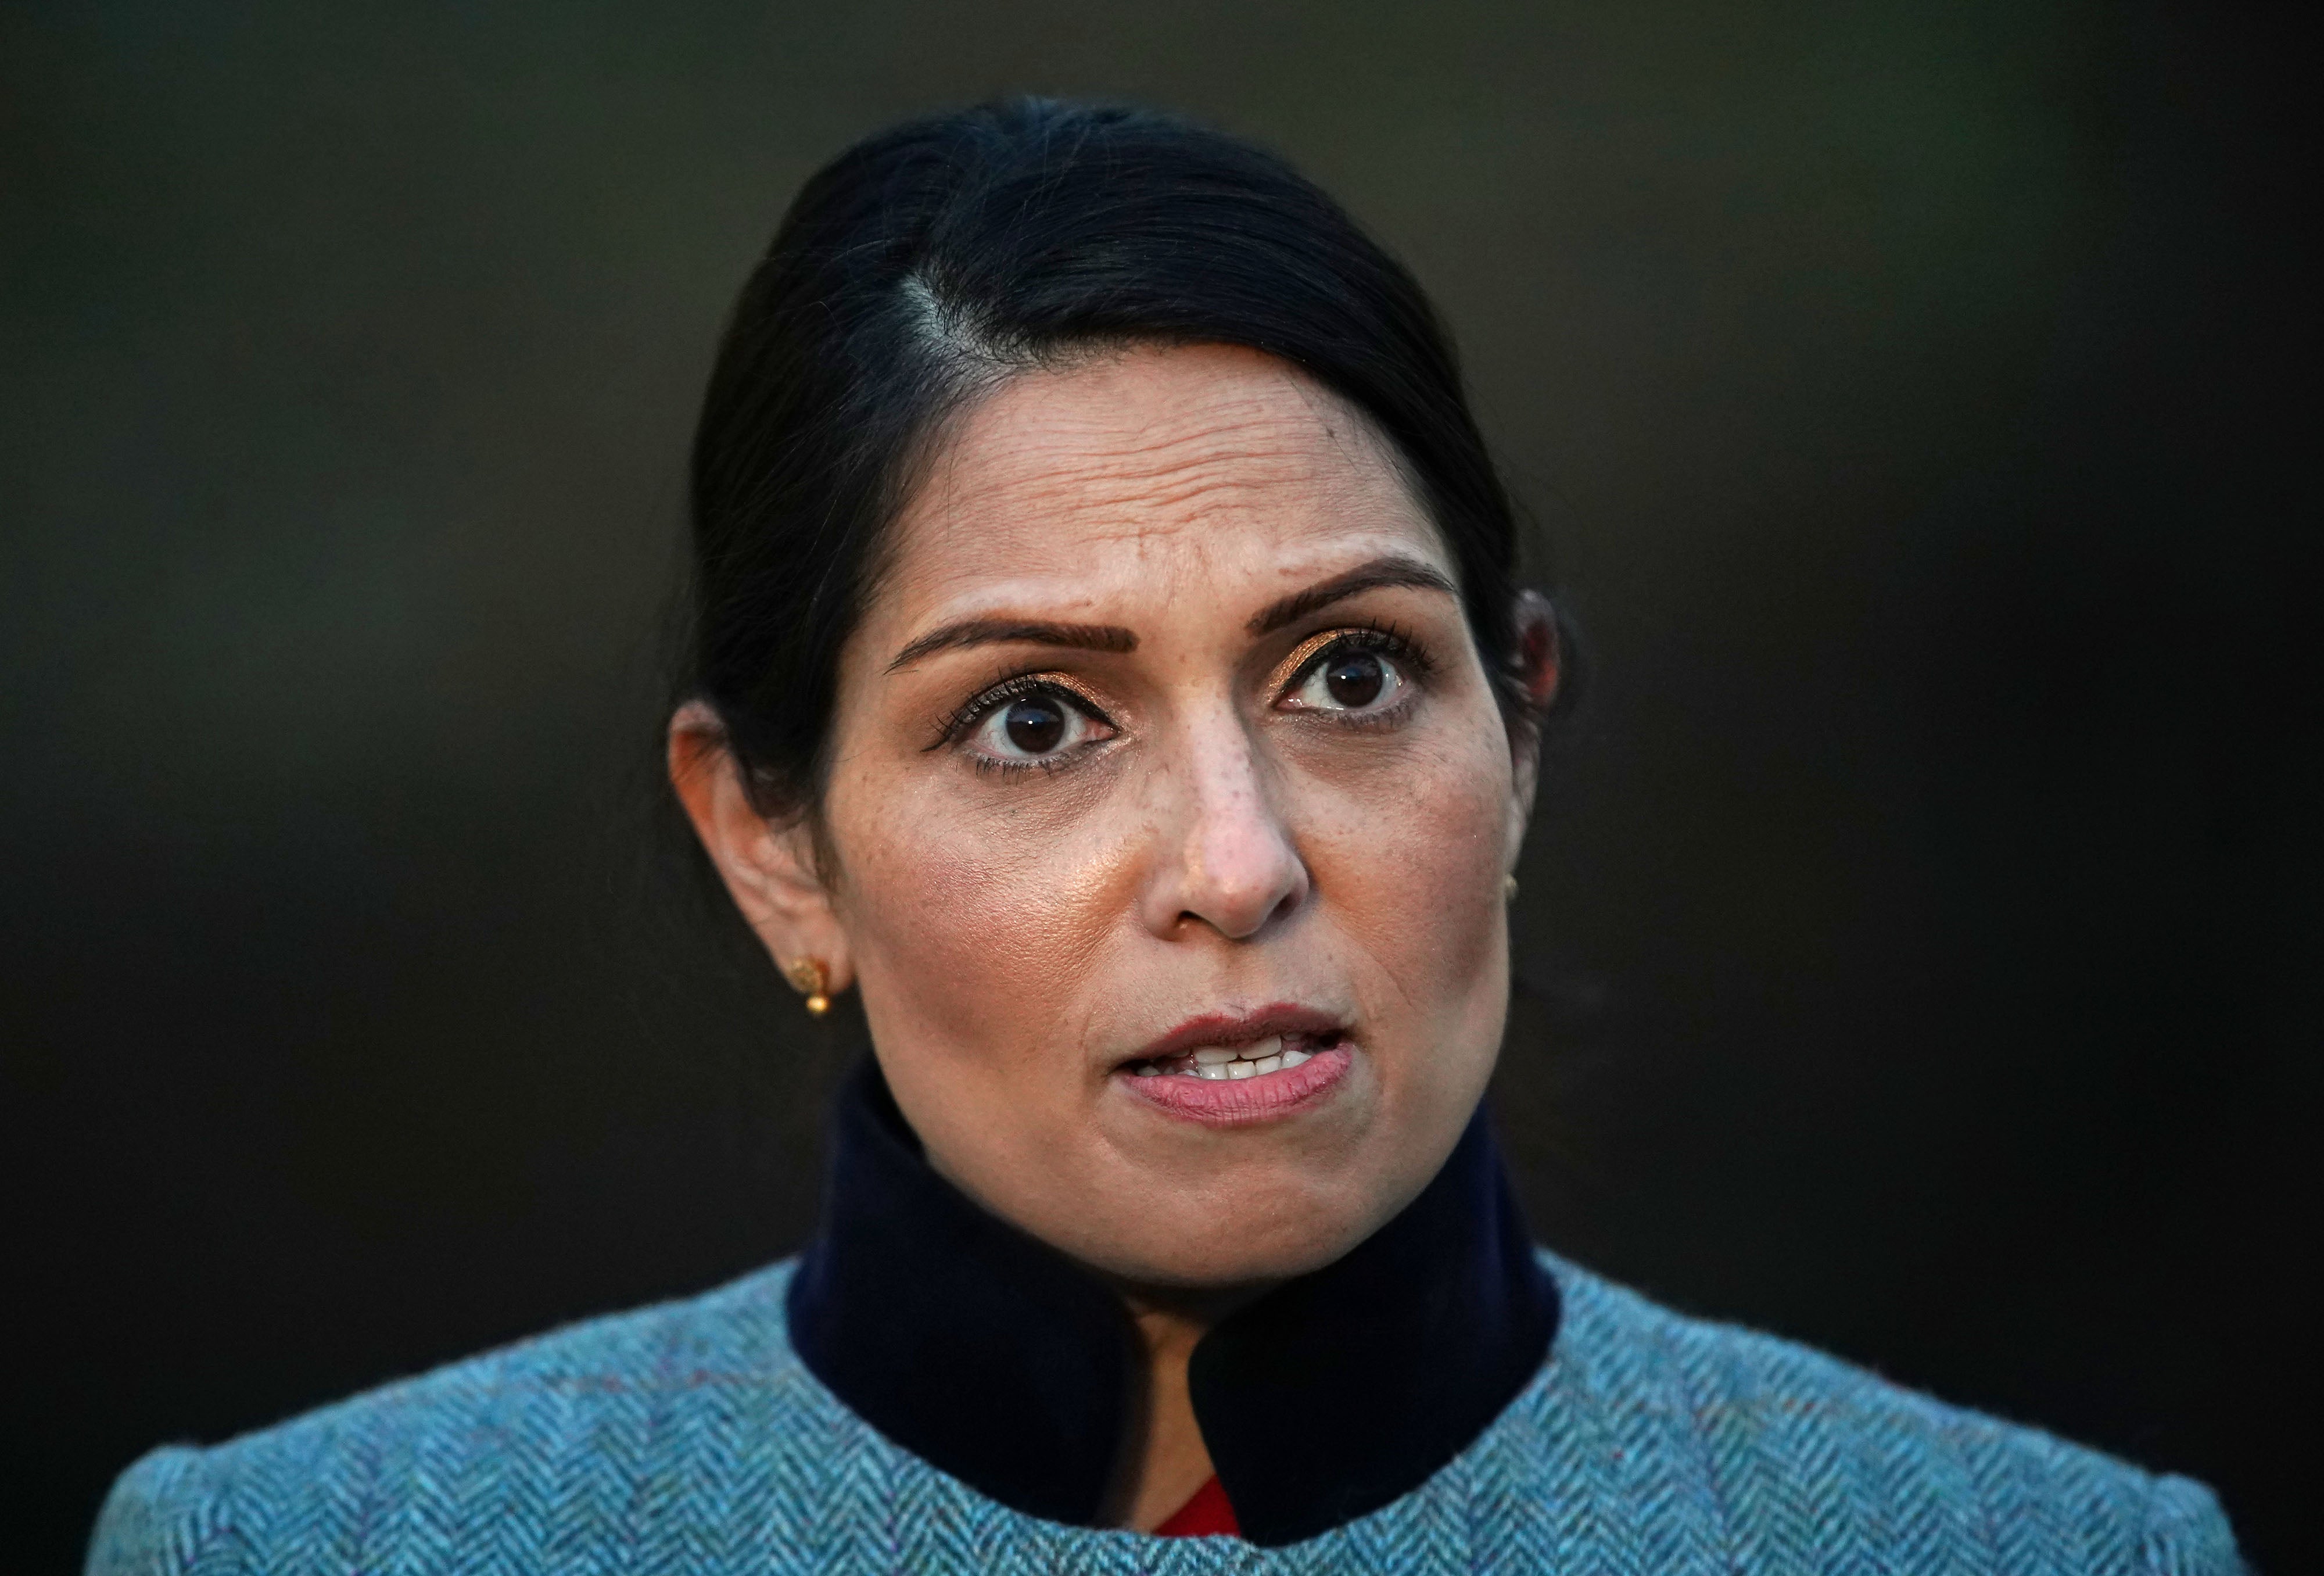 It was said in court that Home Secretary Priti Patel made ‘multiple calls’ to Chief Constable Charlie Hall (PA)